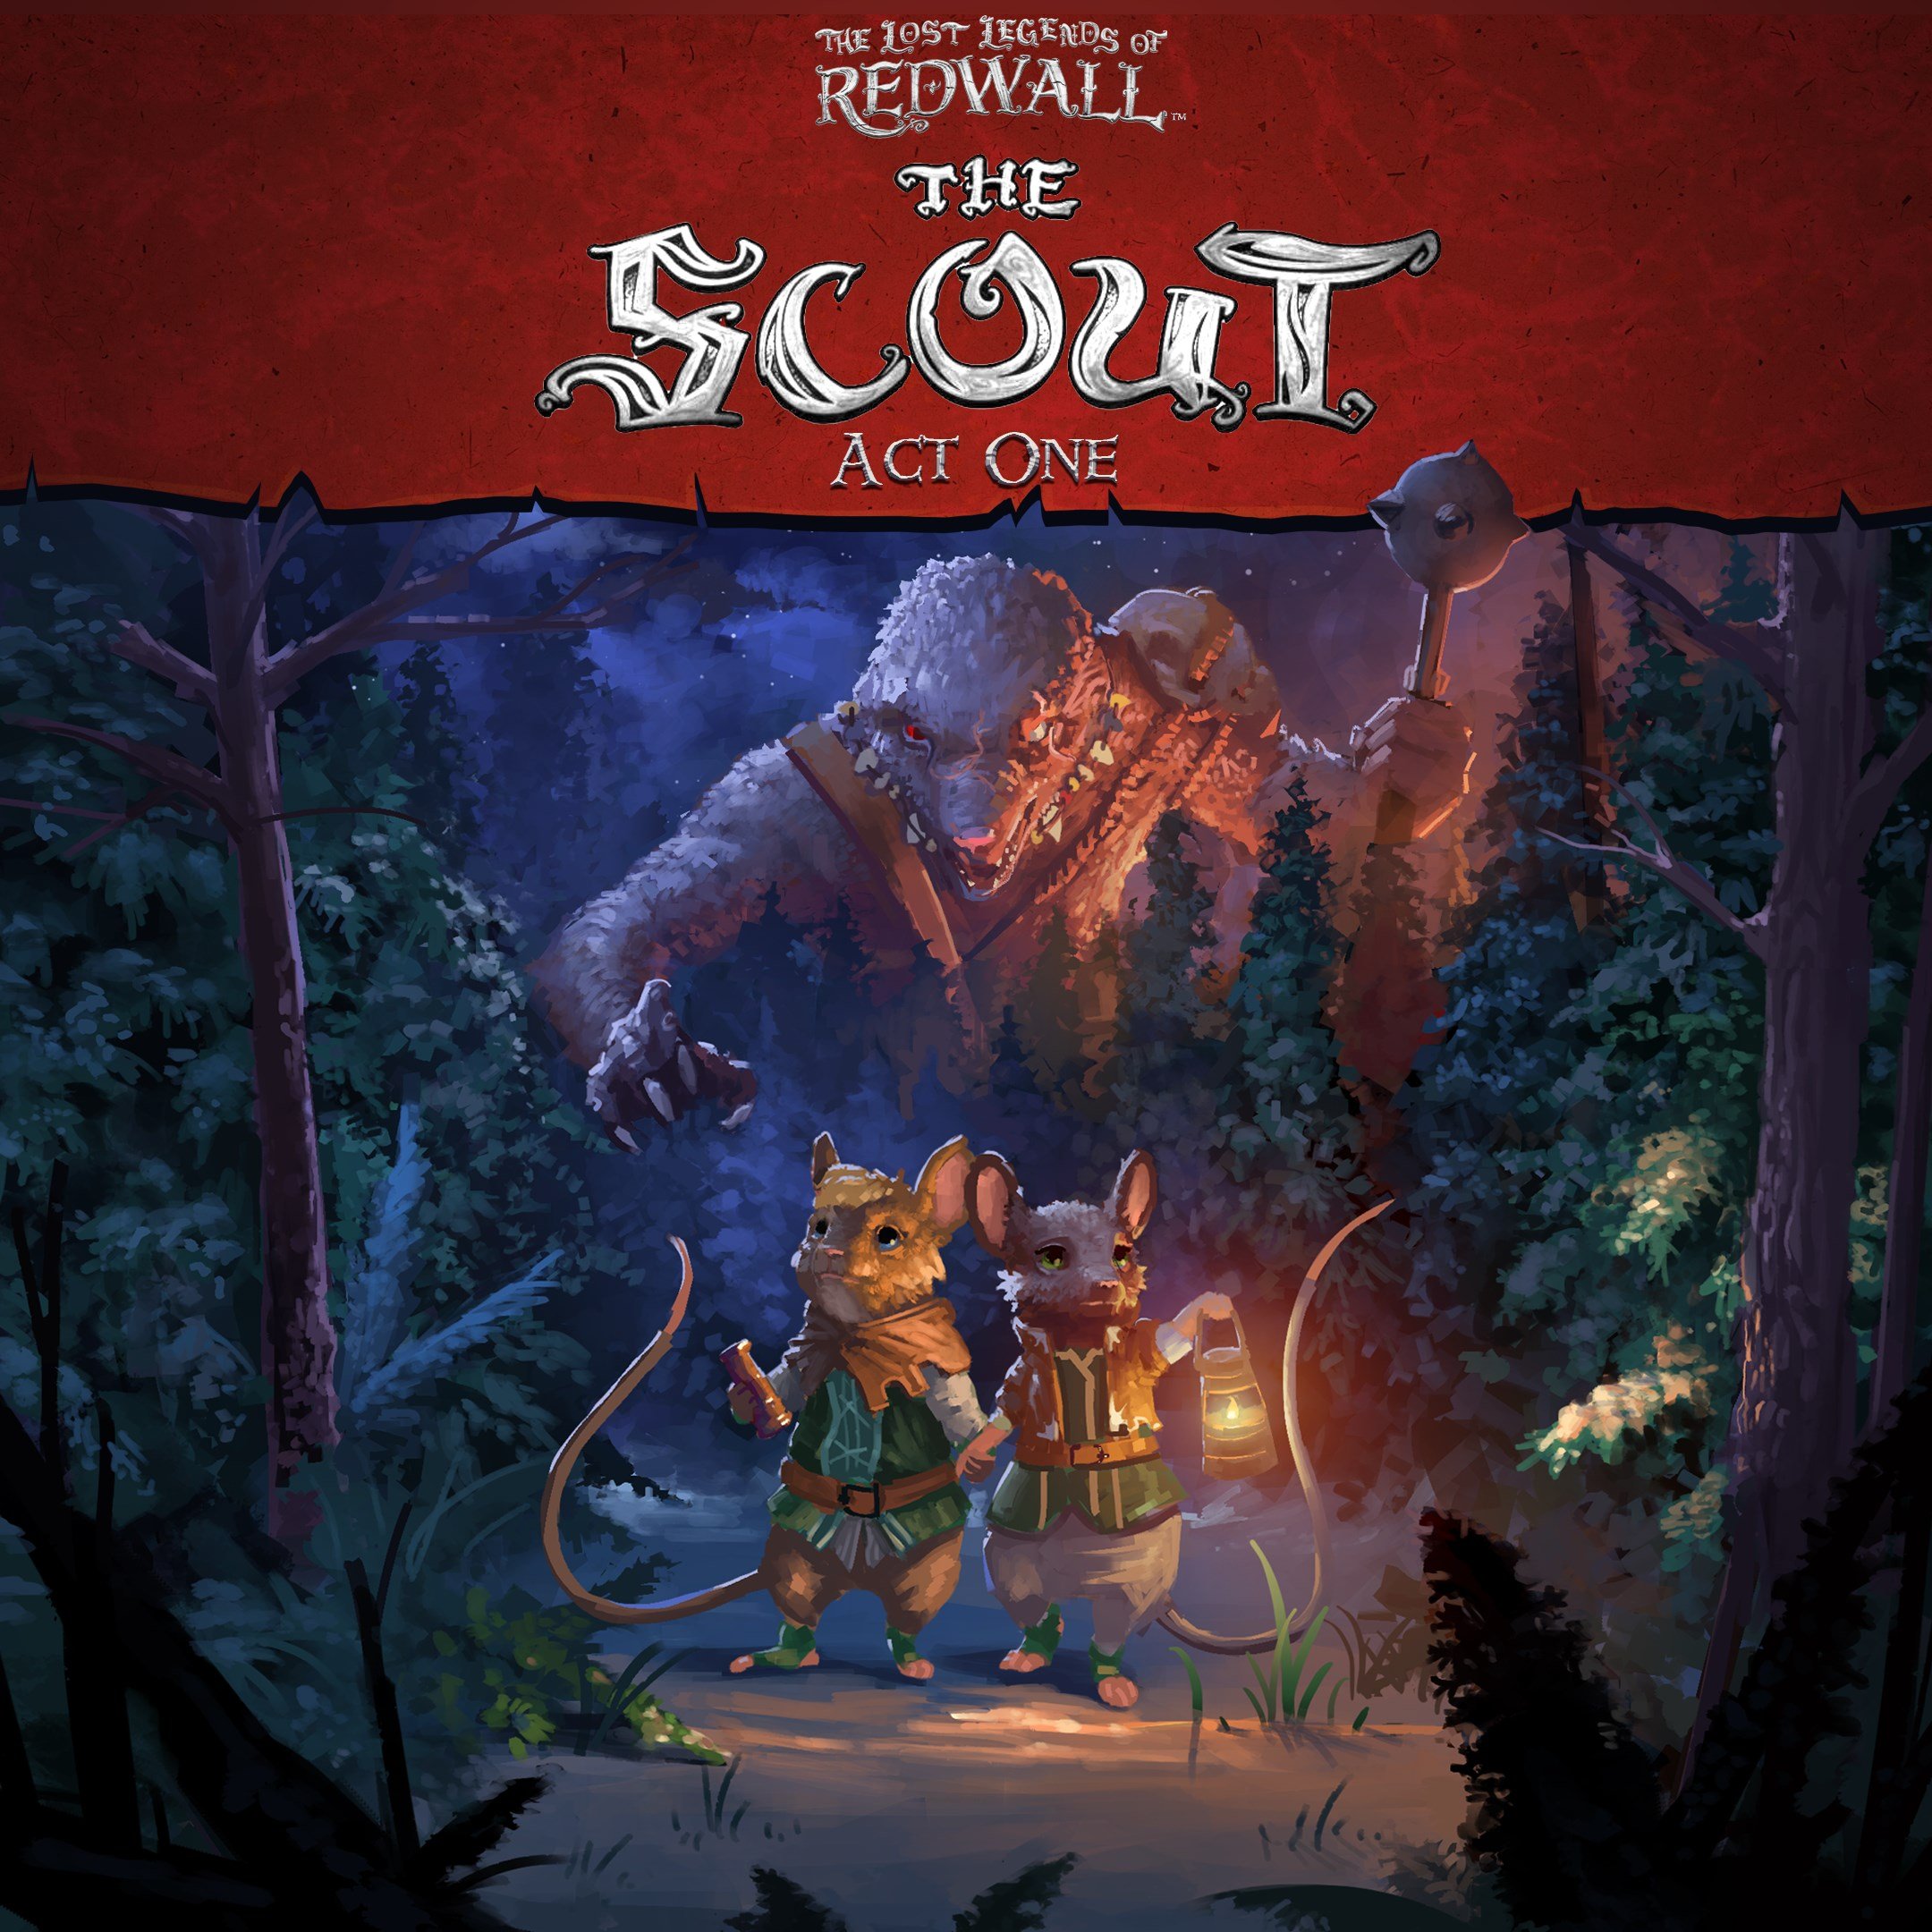 Boxart for The Lost Legends of Redwall : The Scout